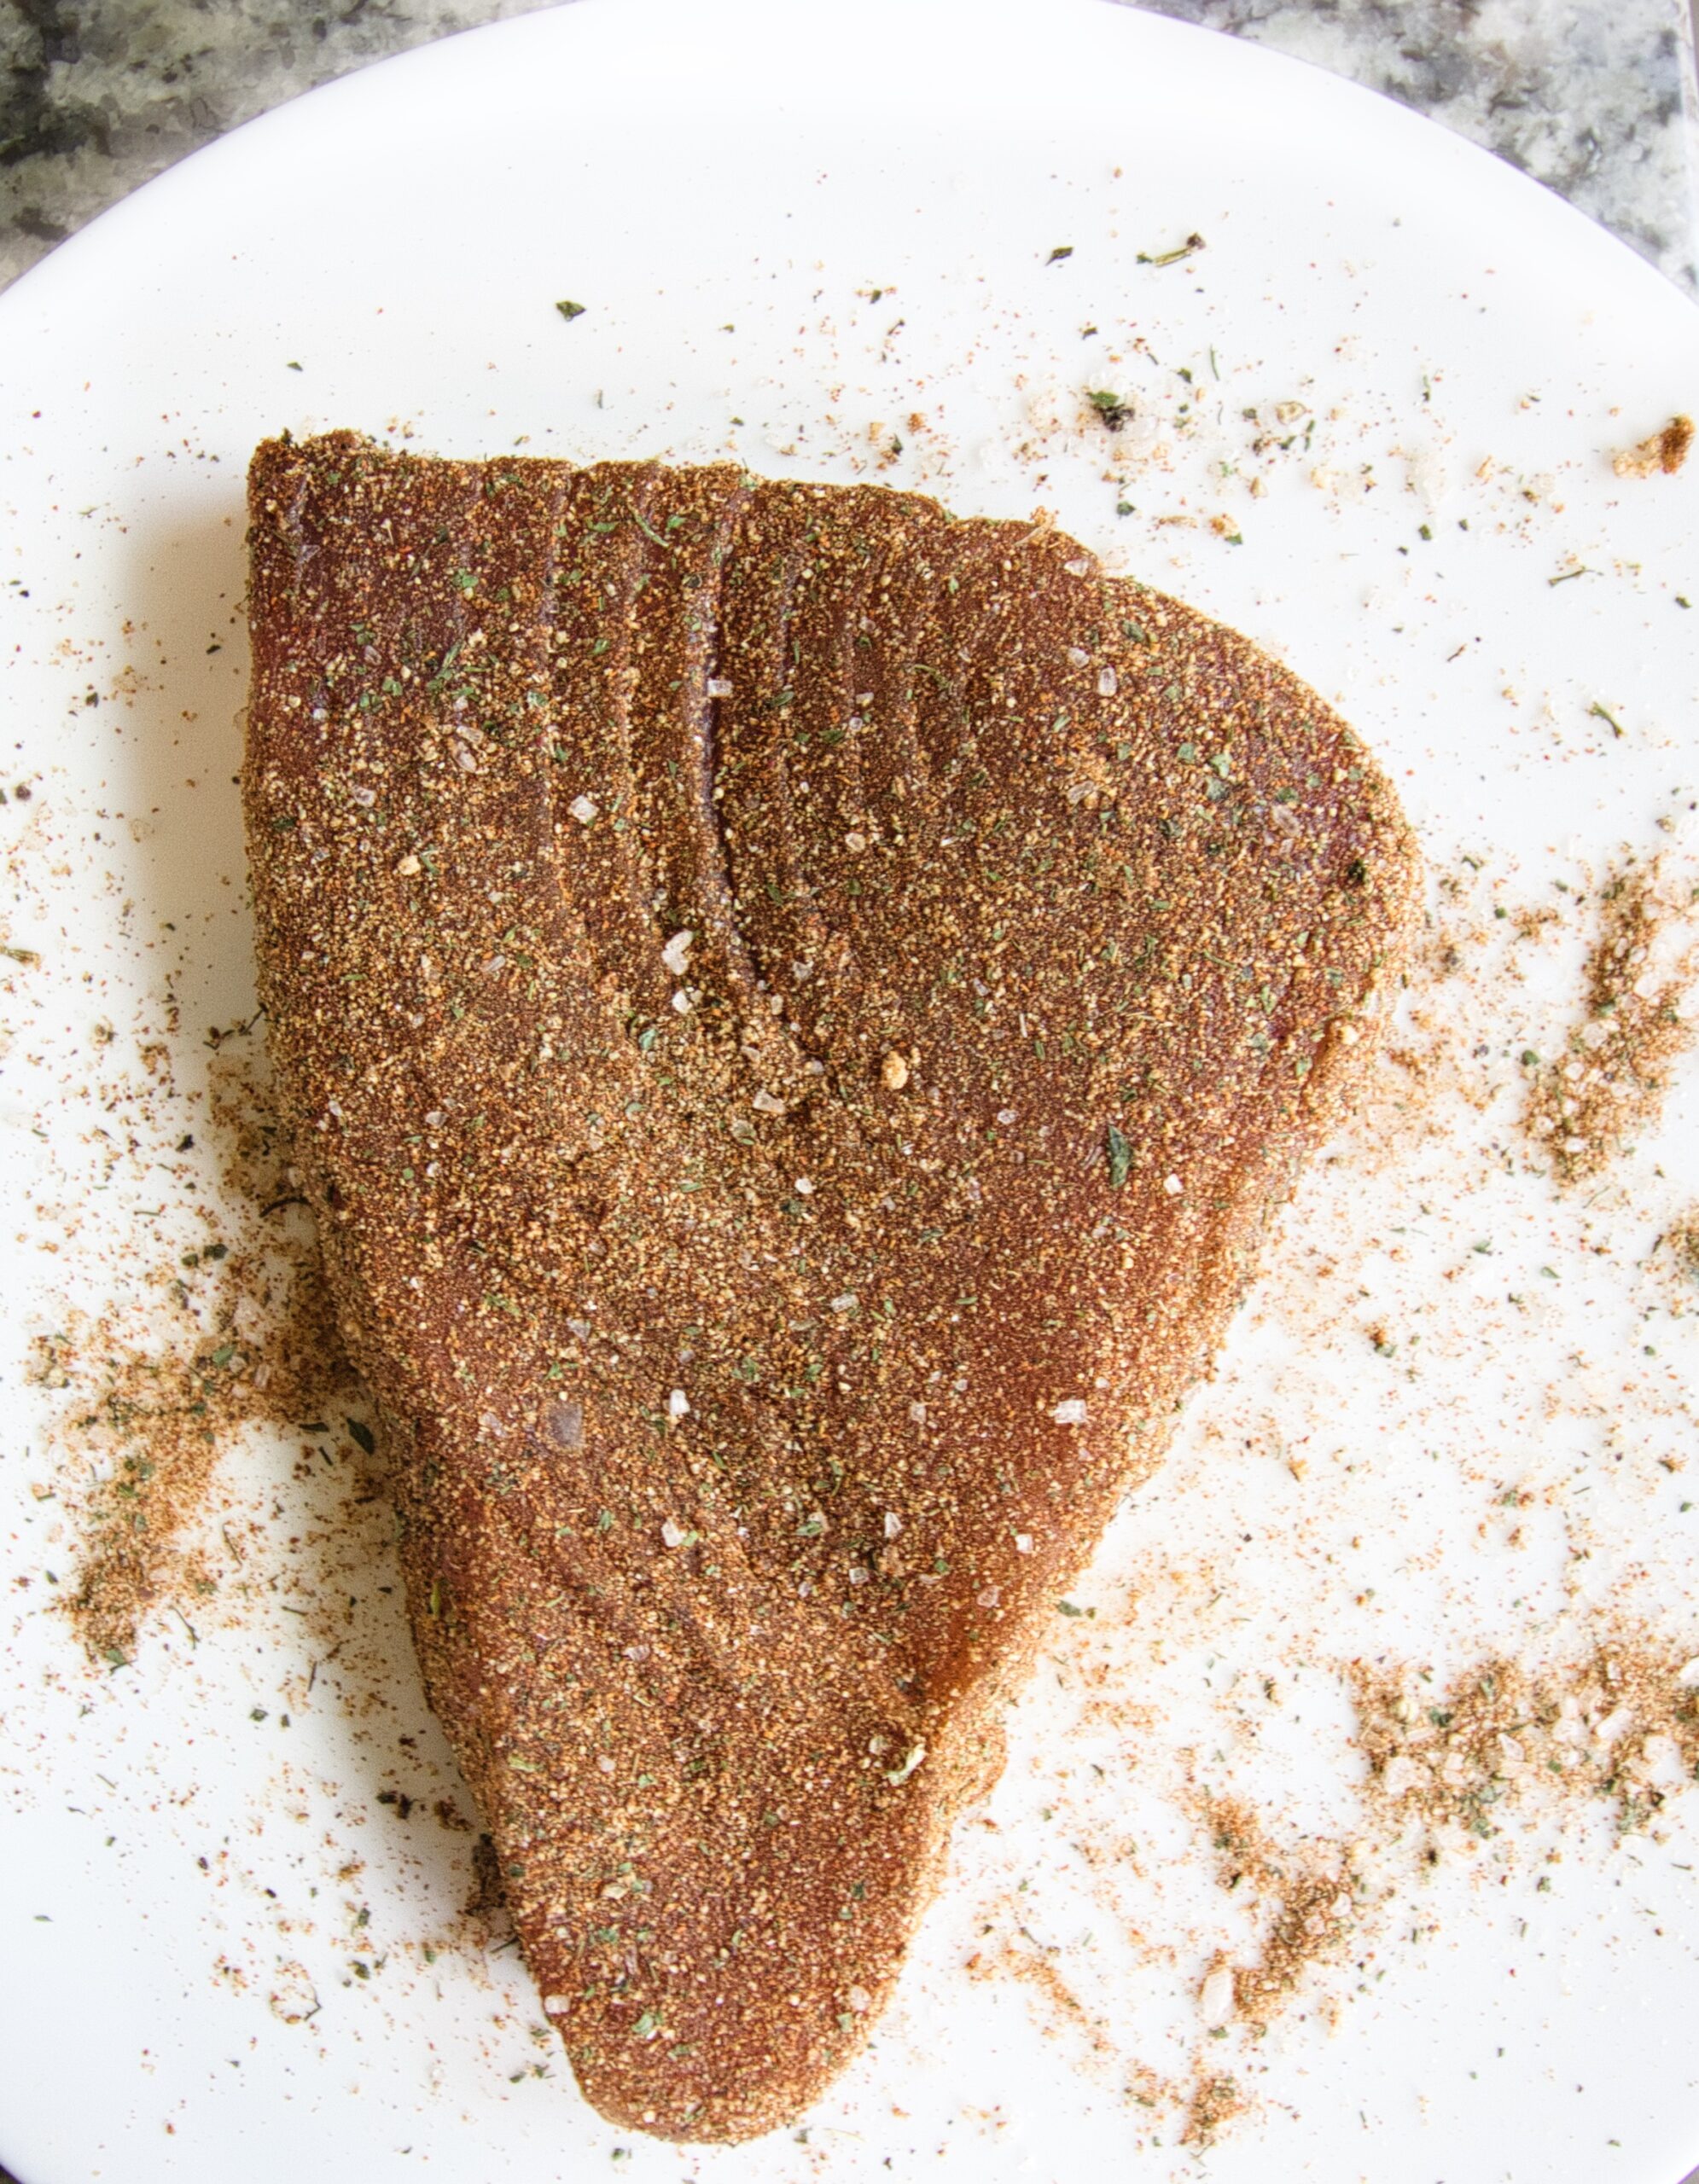 picure of a ahi tuna steak raw with seasoning all over it